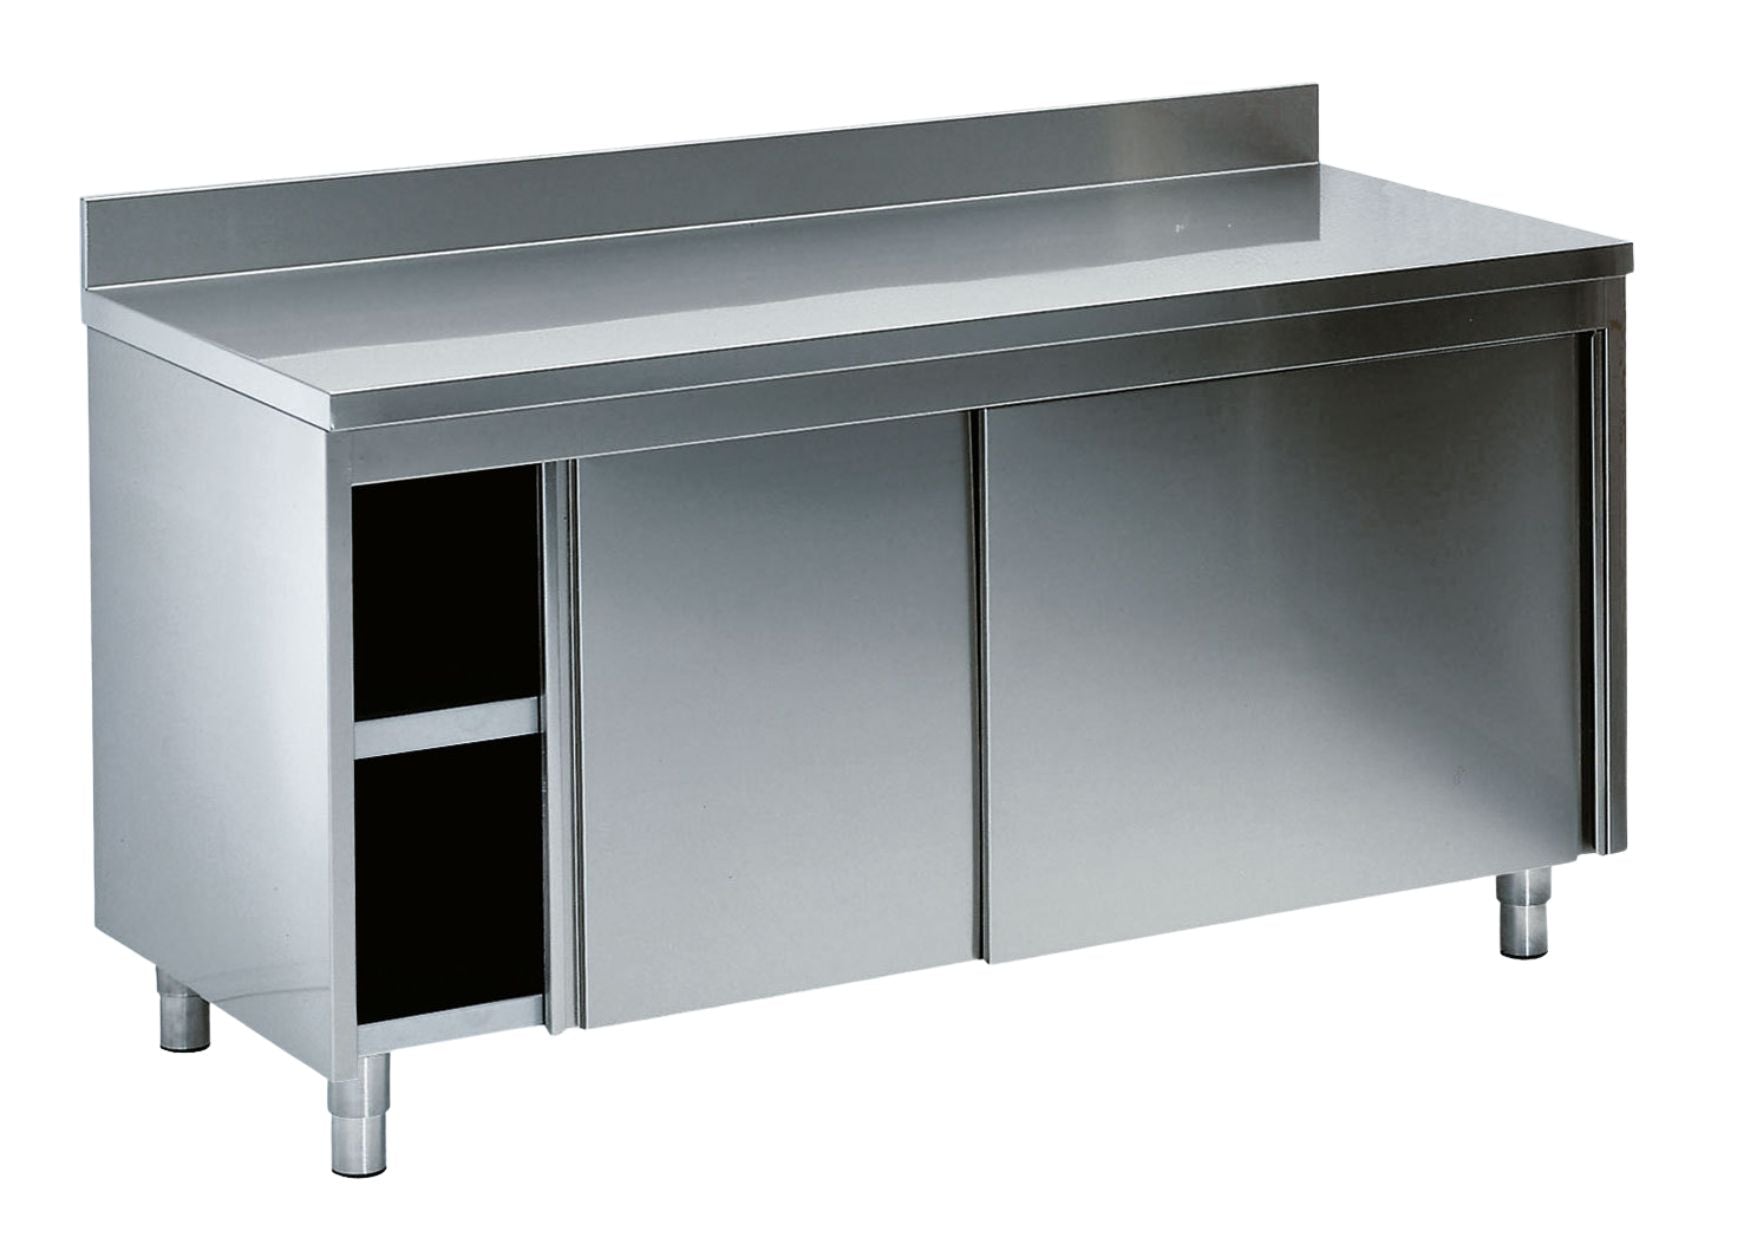 Stainless steel worktable with sliding doors